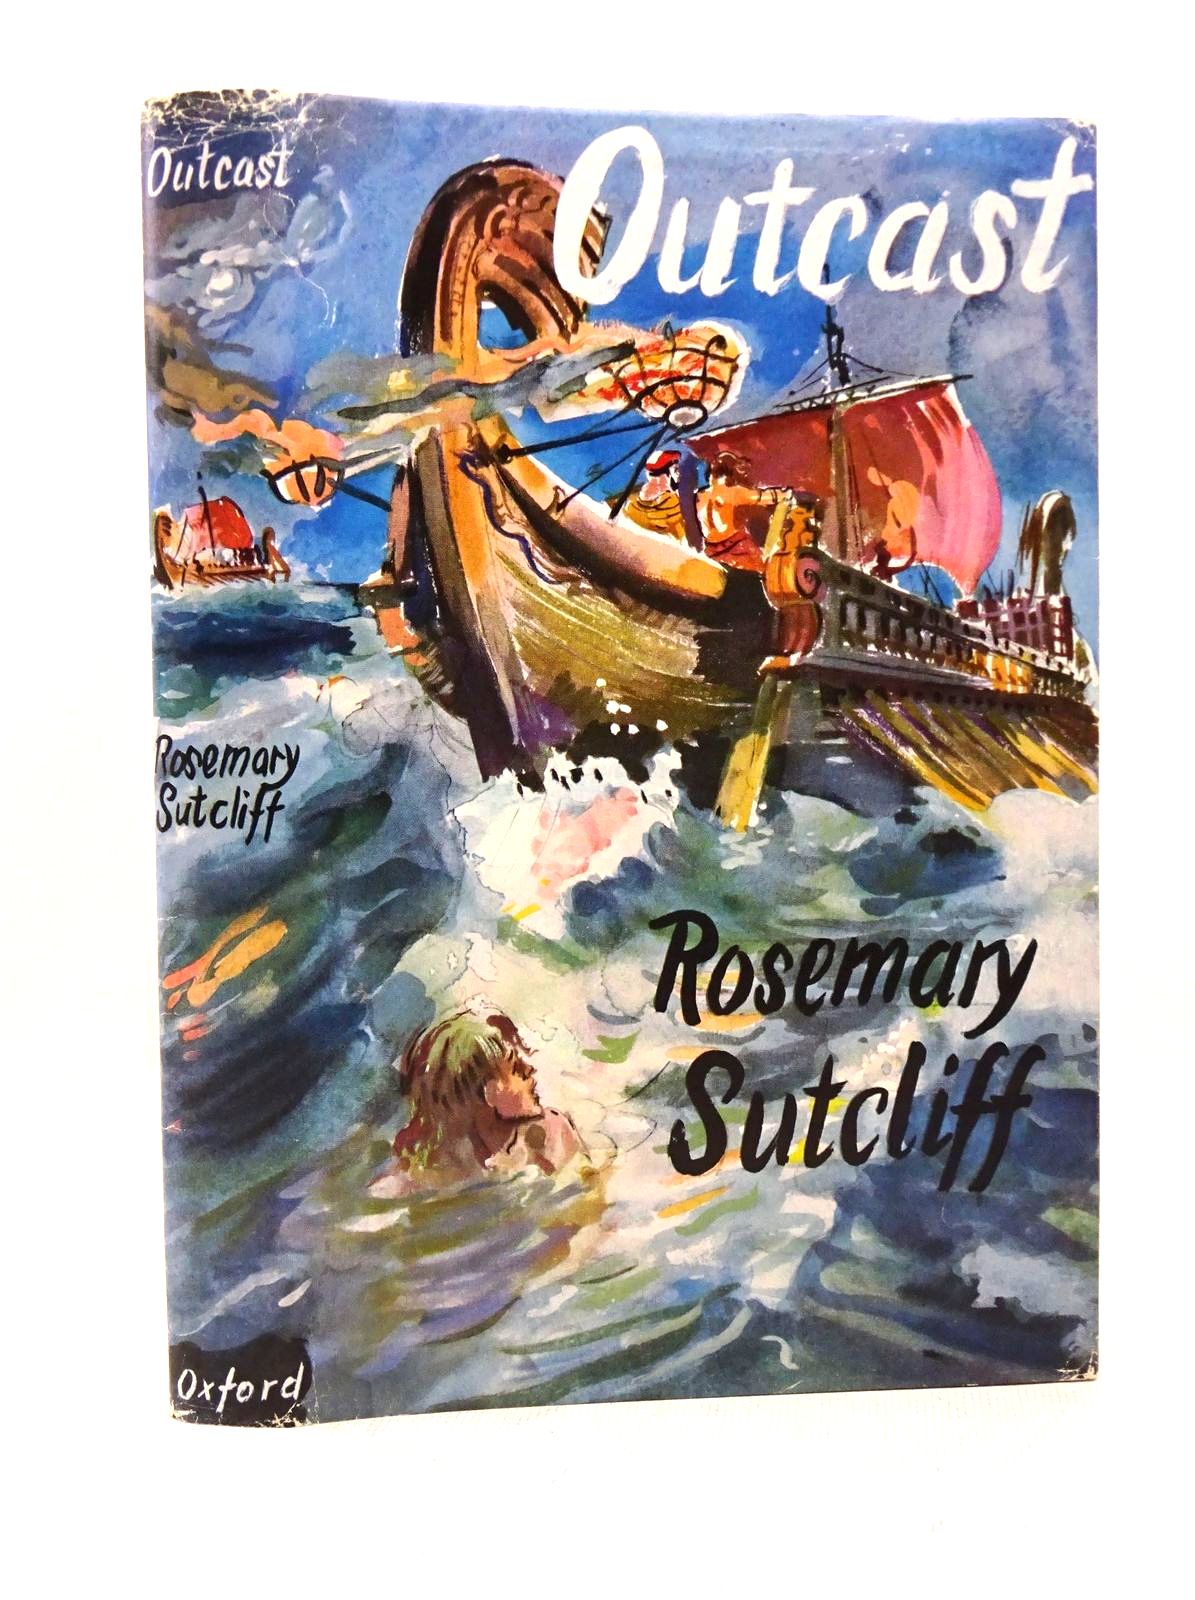 SUTCLIFF, ROSEMARY ILLUSTRATED BY KENNEDY, RICHARD - Outcast